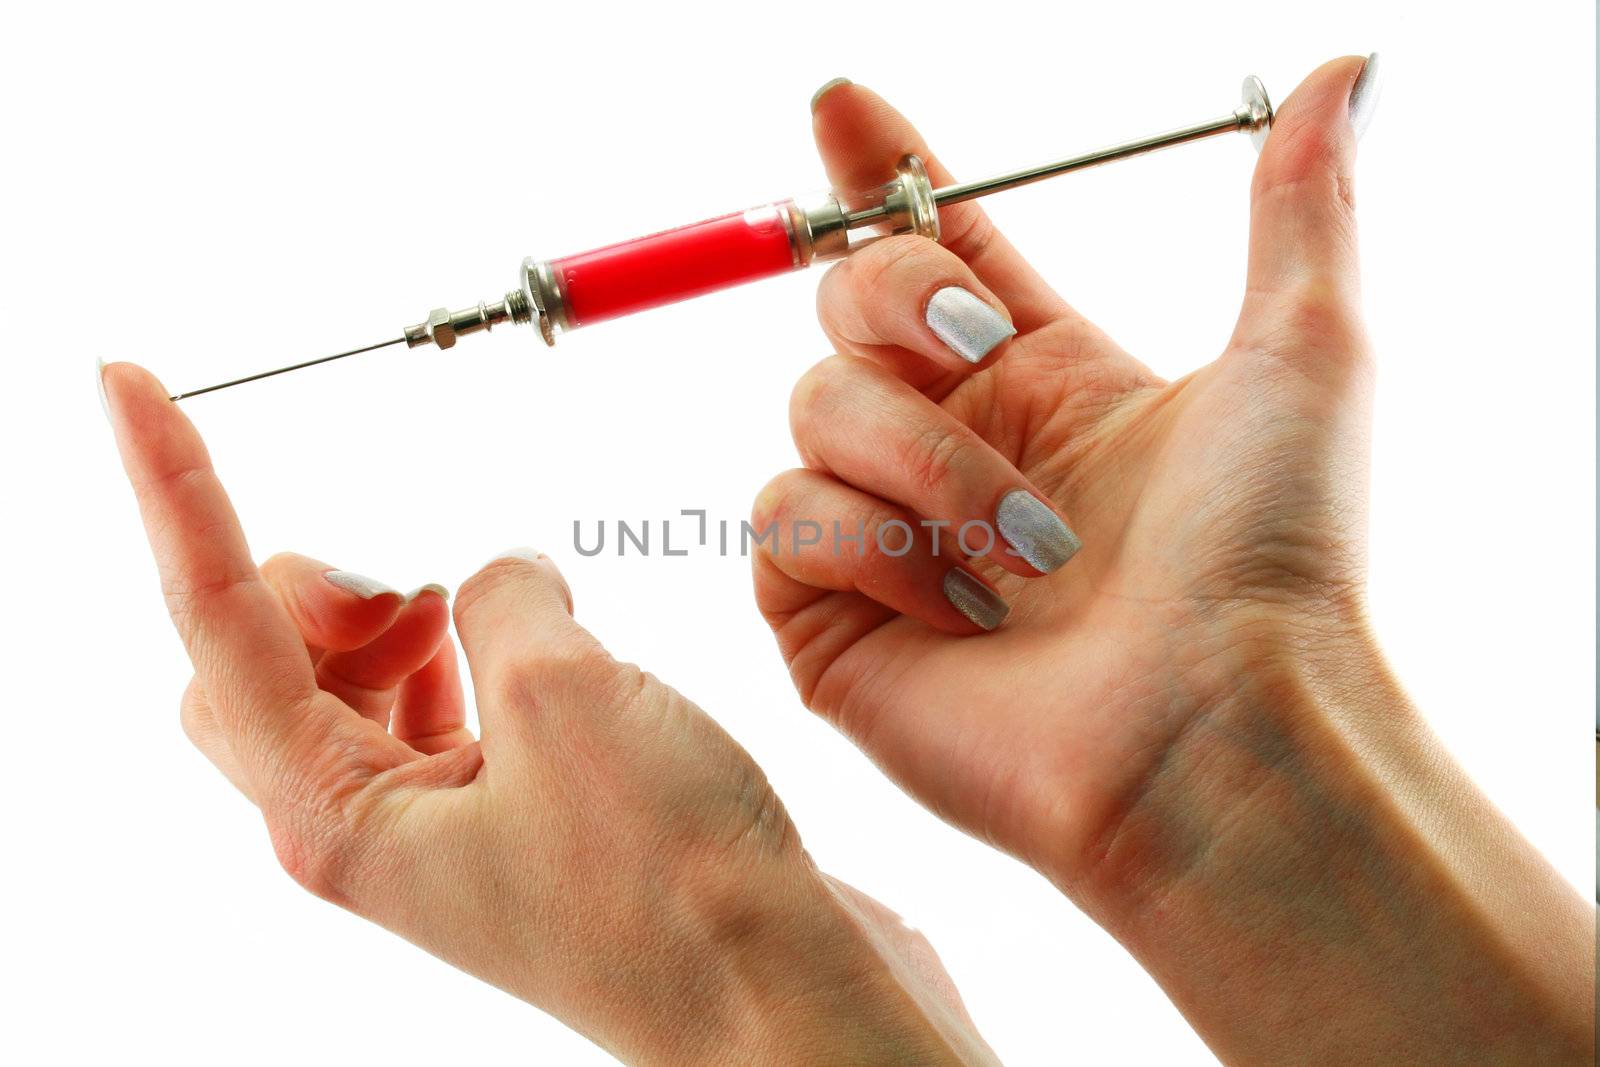 Reusable syringe full of acid substance in hands isolated on a white background